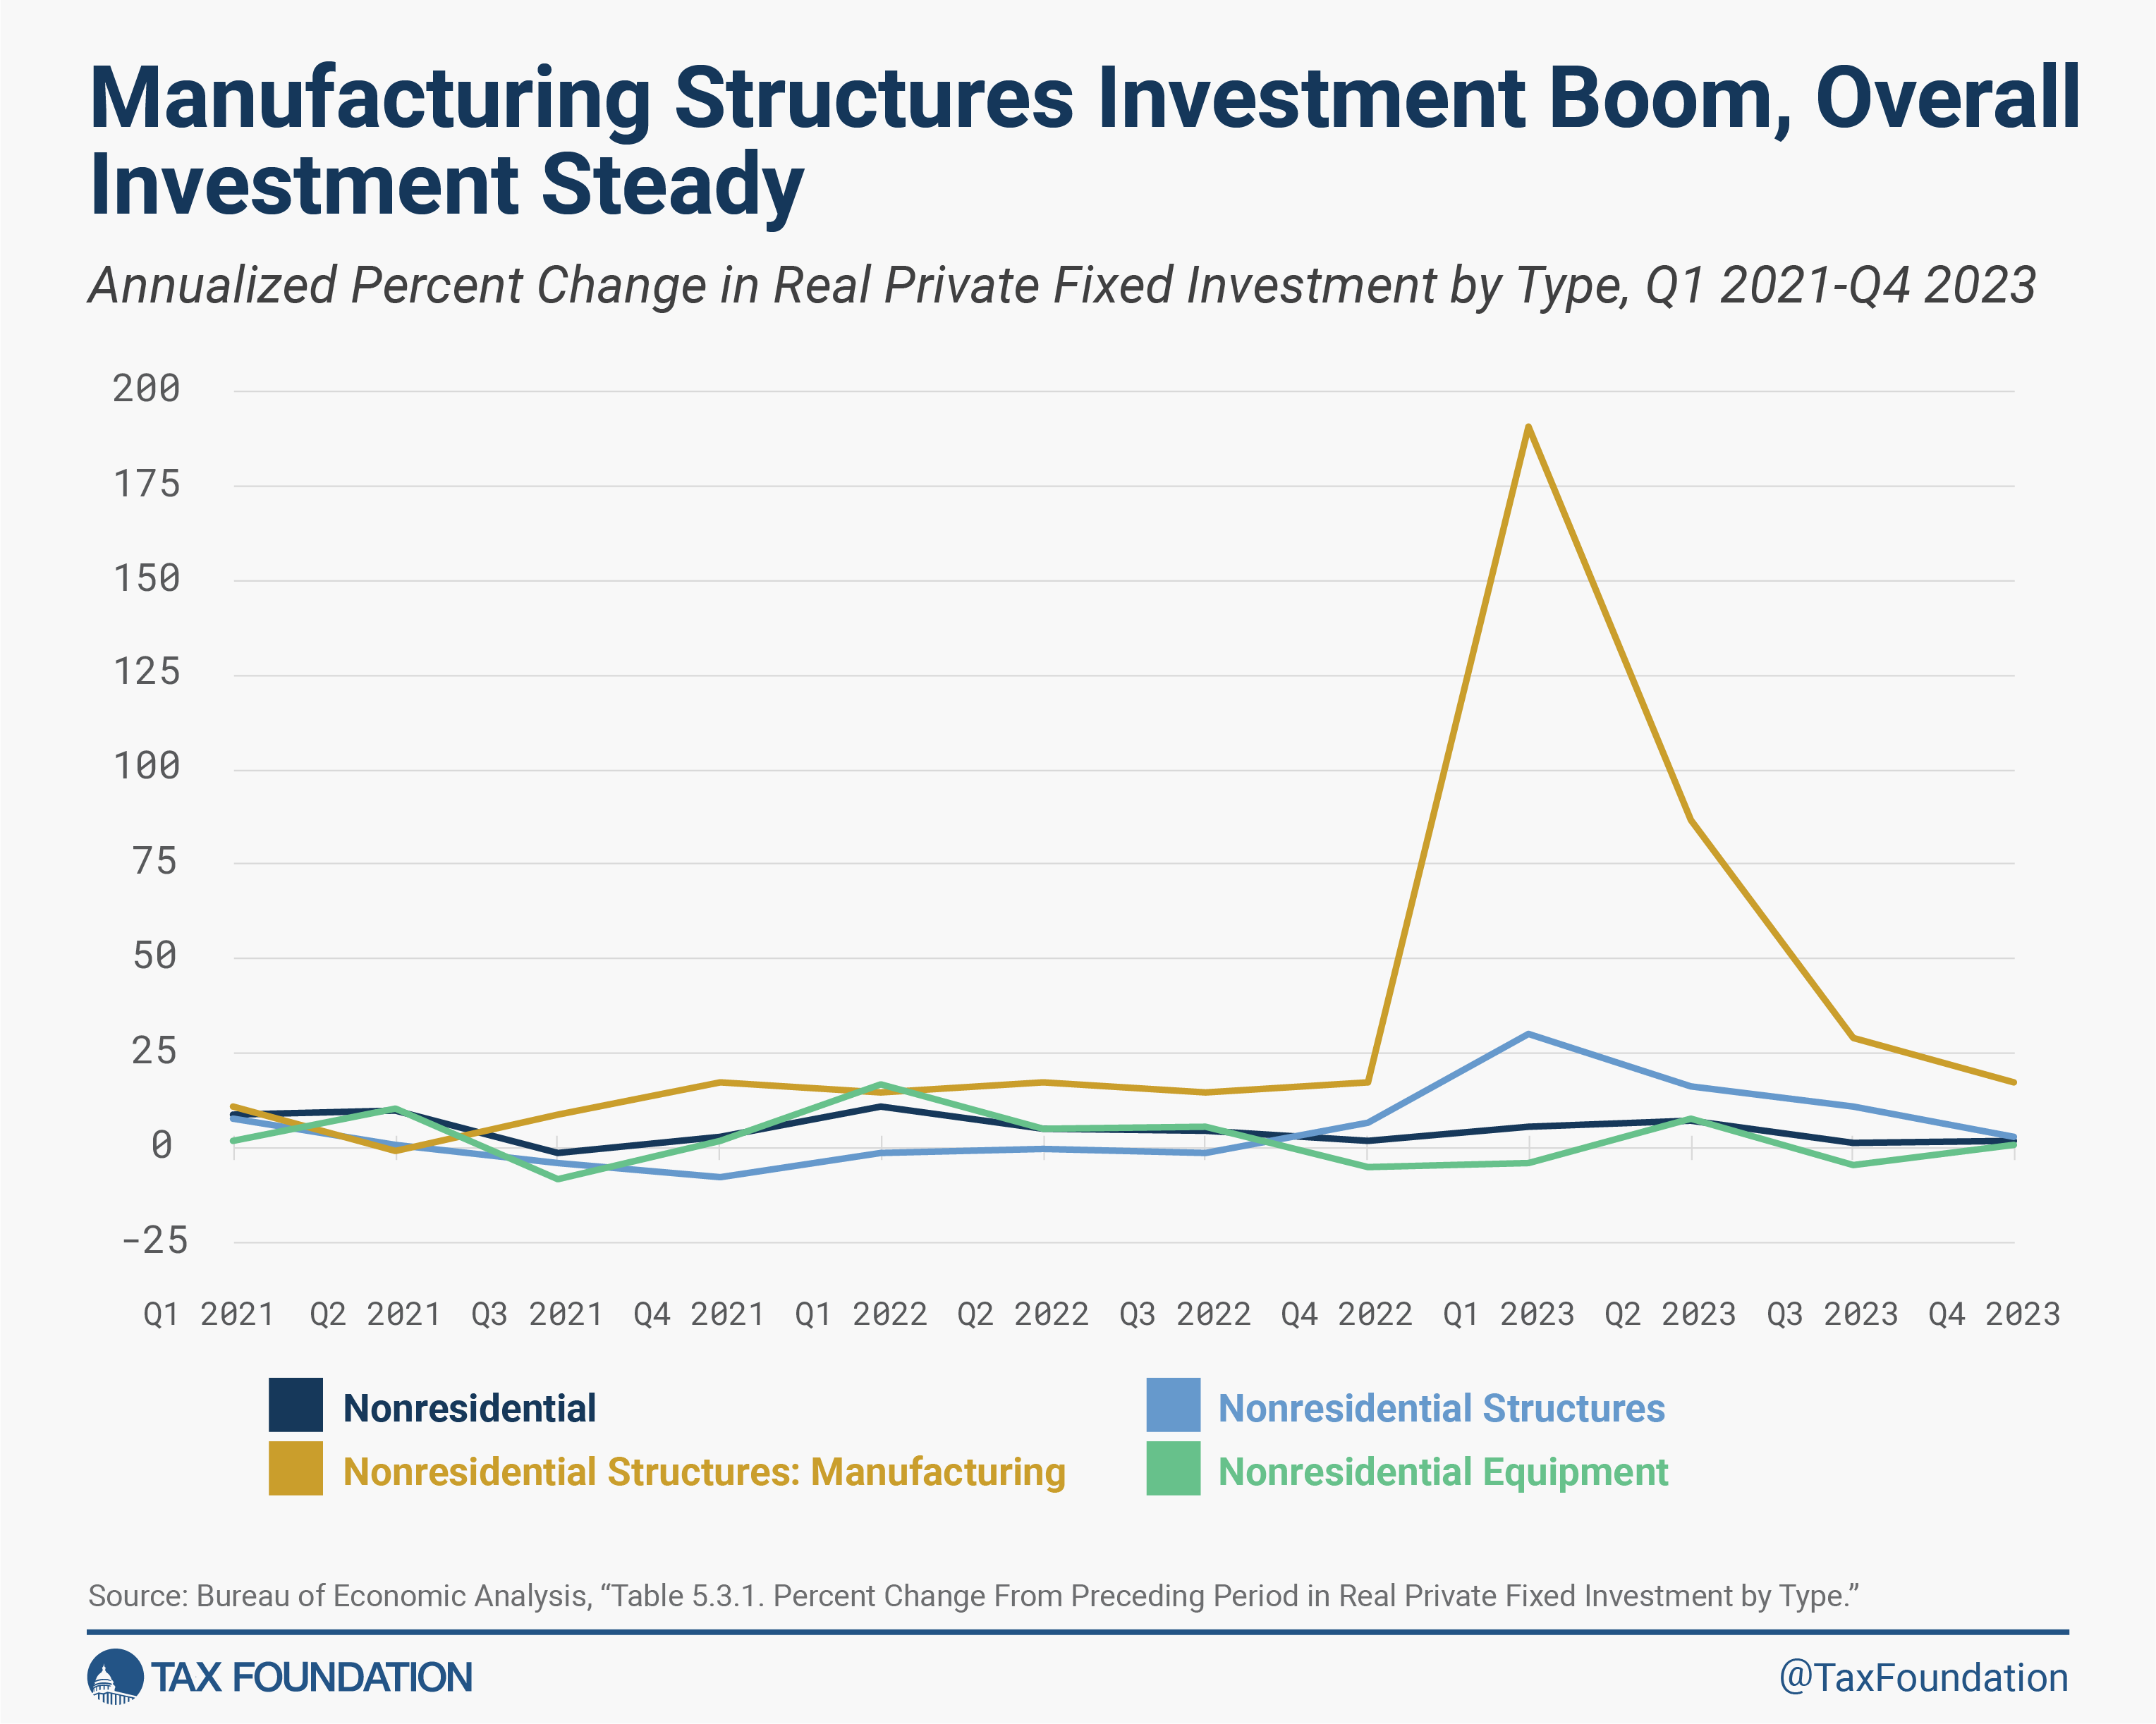 Manufacturing investment boomed following the Tax Cuts and Jobs Act TCJA